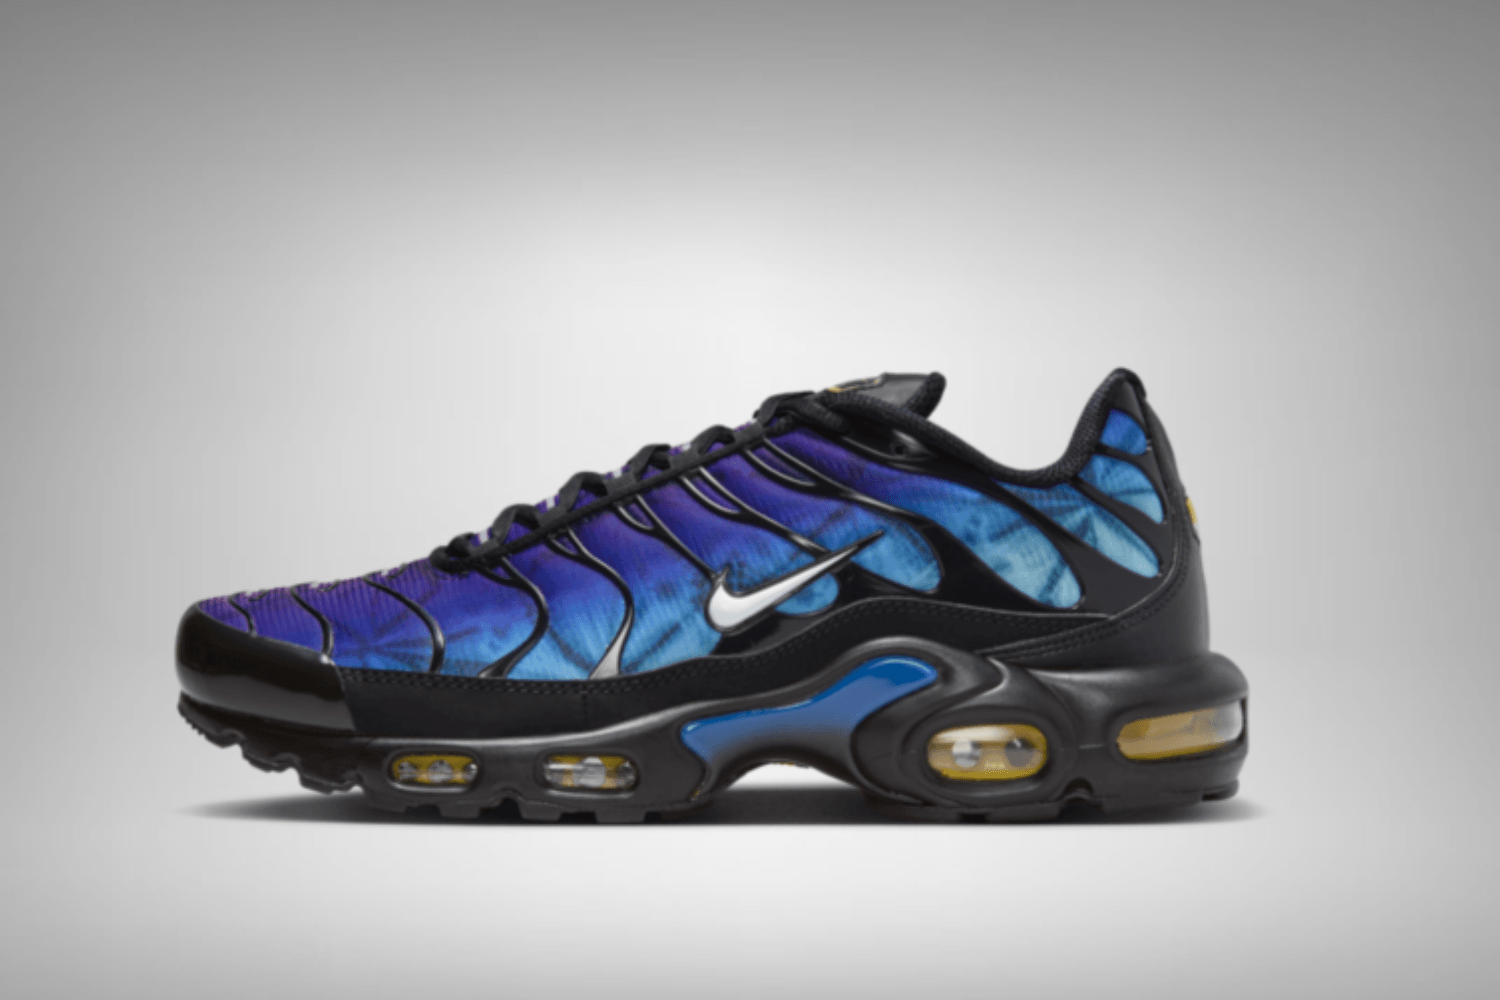 Nike celebrates the '25th Anniversary' of the Air Max Plus